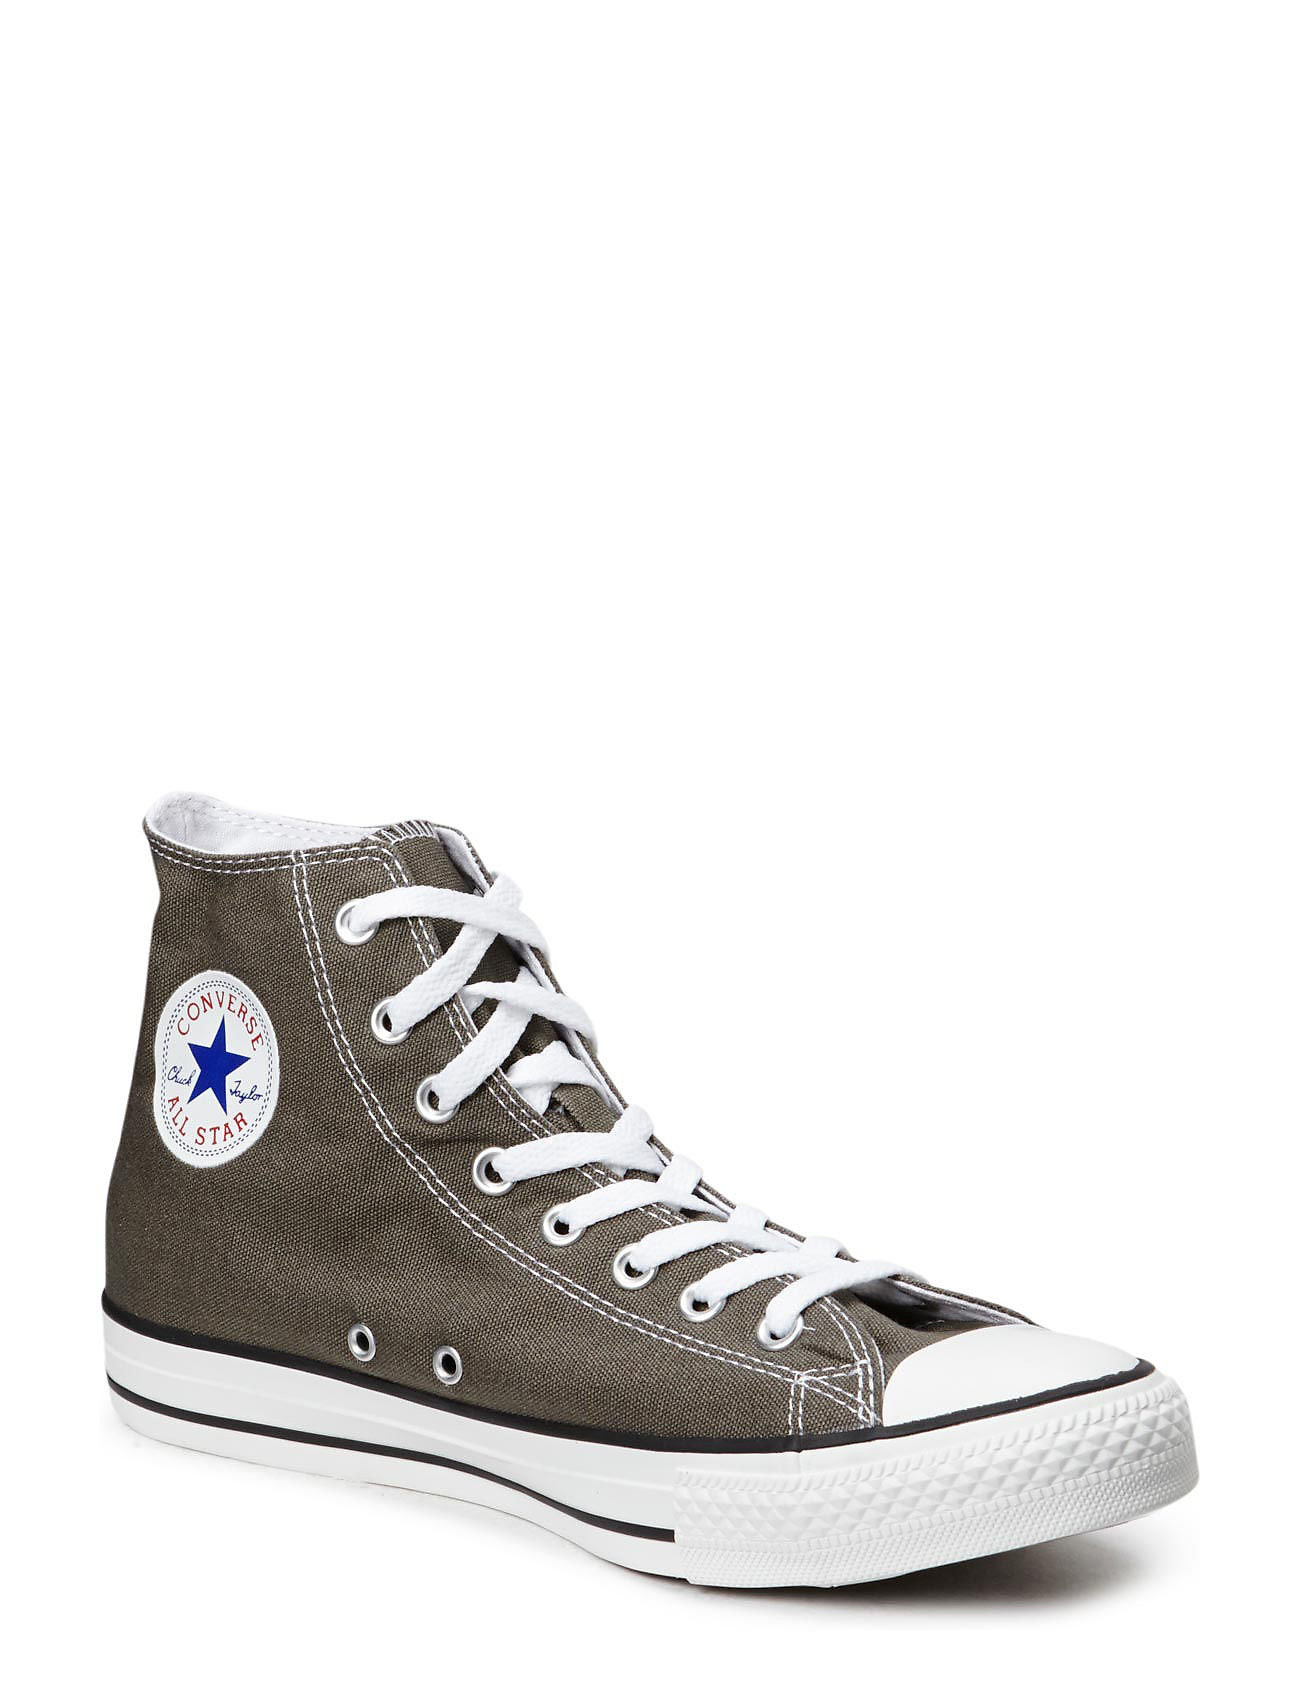 Converse "Chuck Taylor All Star High-top Sneakers Beige Converse"